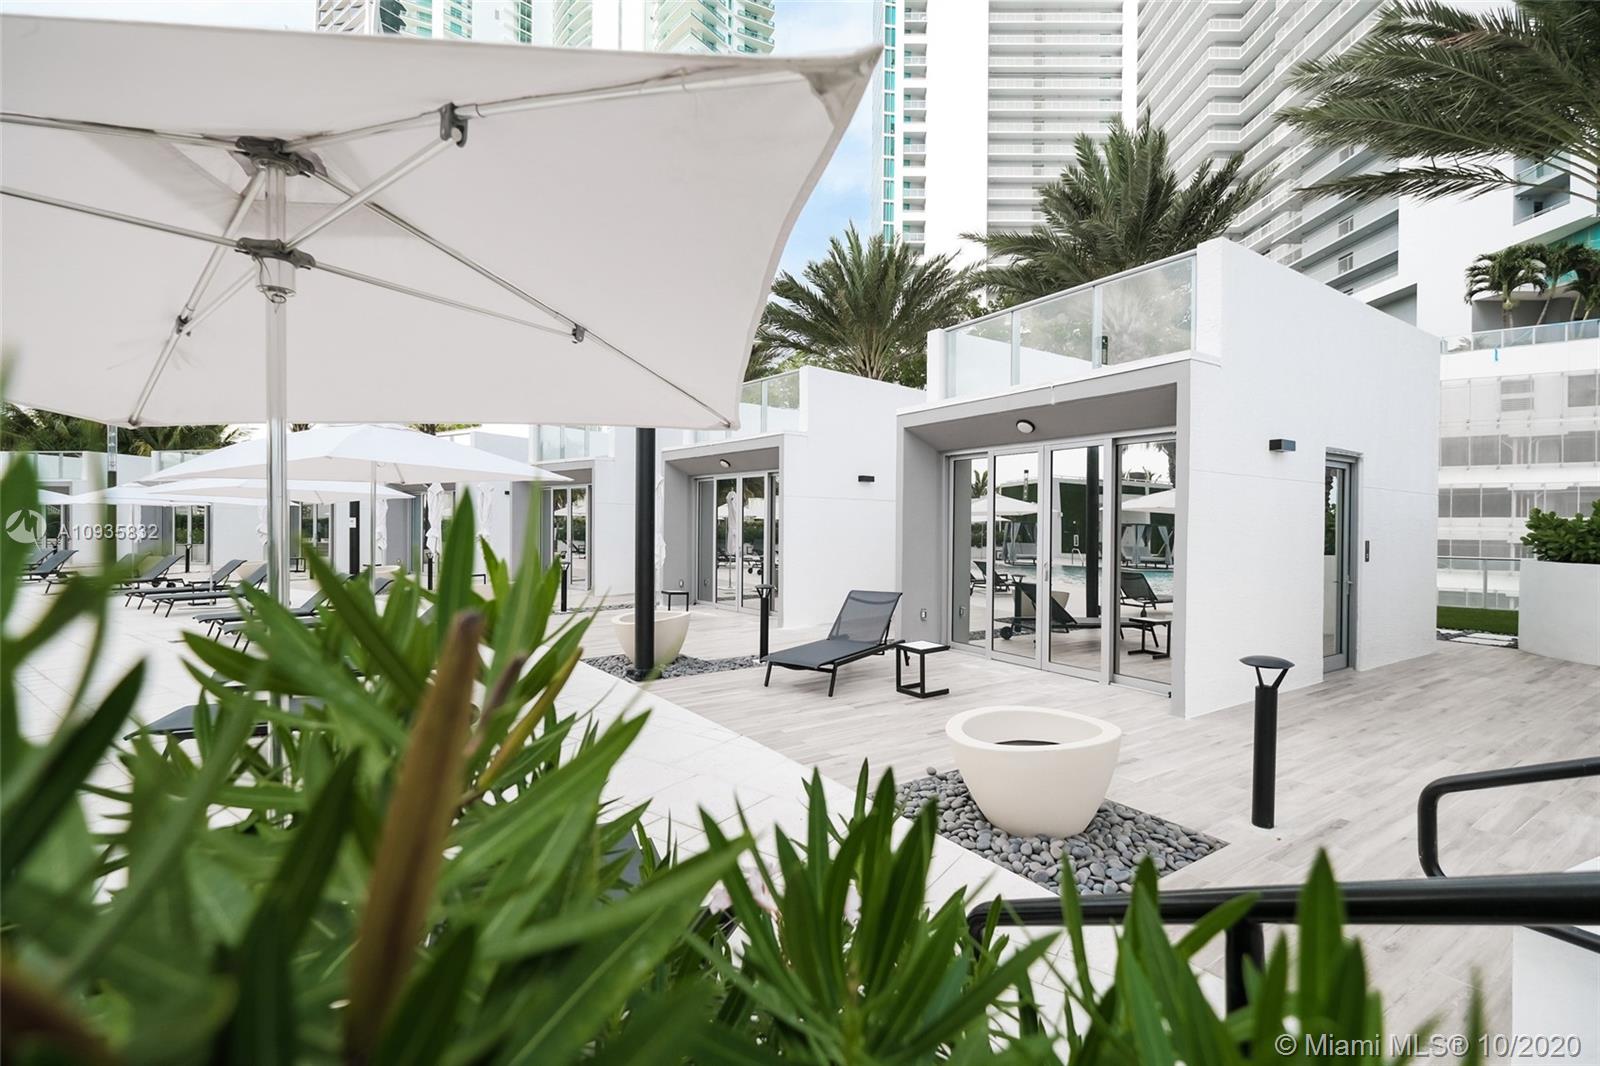 Privately-Owned Pool Cabana situated on the 7th-Level Pool Deck at Paramount Miami Worldcenter in Downtown Miami. Cabana PB 07 offers 230 SF of interior space with A/C, wood-grained porcelain flooring, kitchenette, full bathroom with glass-enclosed shower, impact-resistant windows/sliding glass doors & remote-controlled shades & lLARGEST BACKYARD AREA (see pictures) and the bay view from the roof top sun deck! The front of the villa offers a private patio with lounge chairs and the pool view. NOTE: the Buyer of this Cabana MUST be a current unit owner in the building.